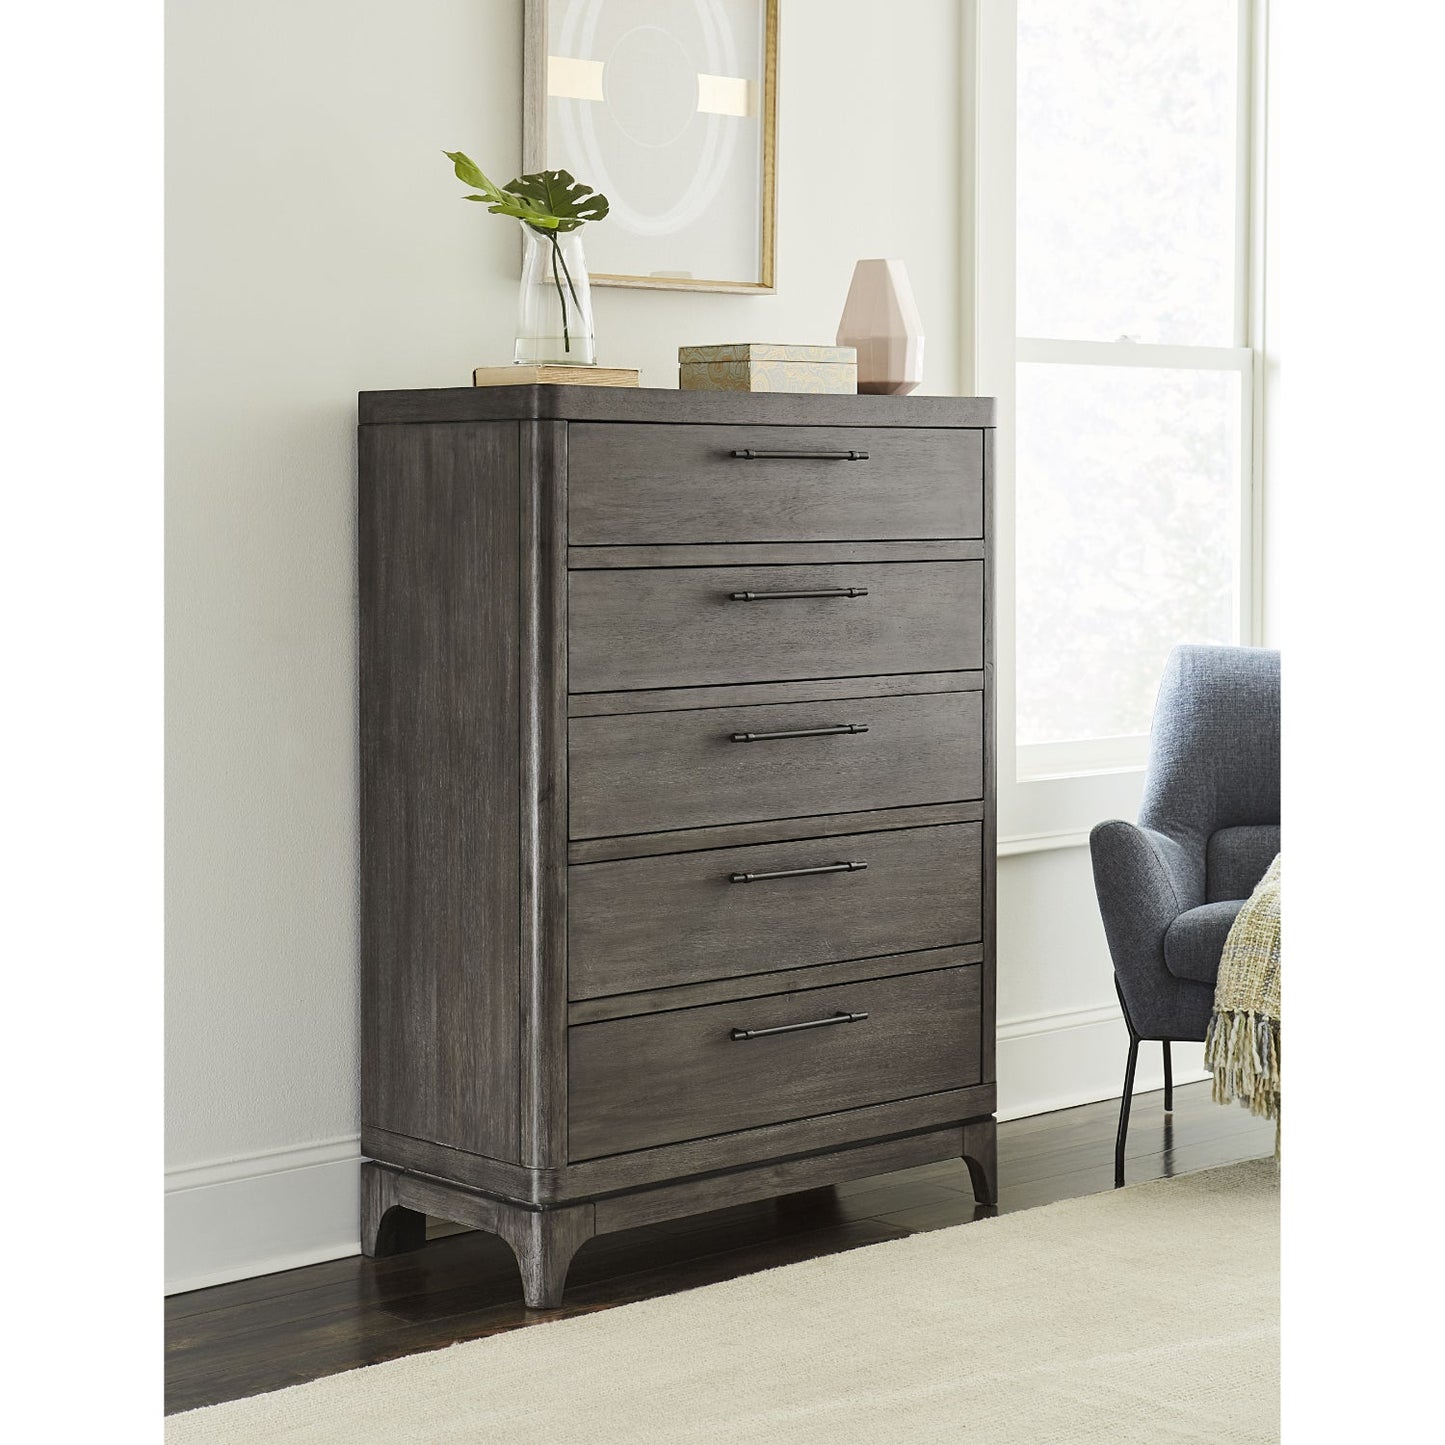 Modus Cicero Five drawer Chest in Rustic Latte